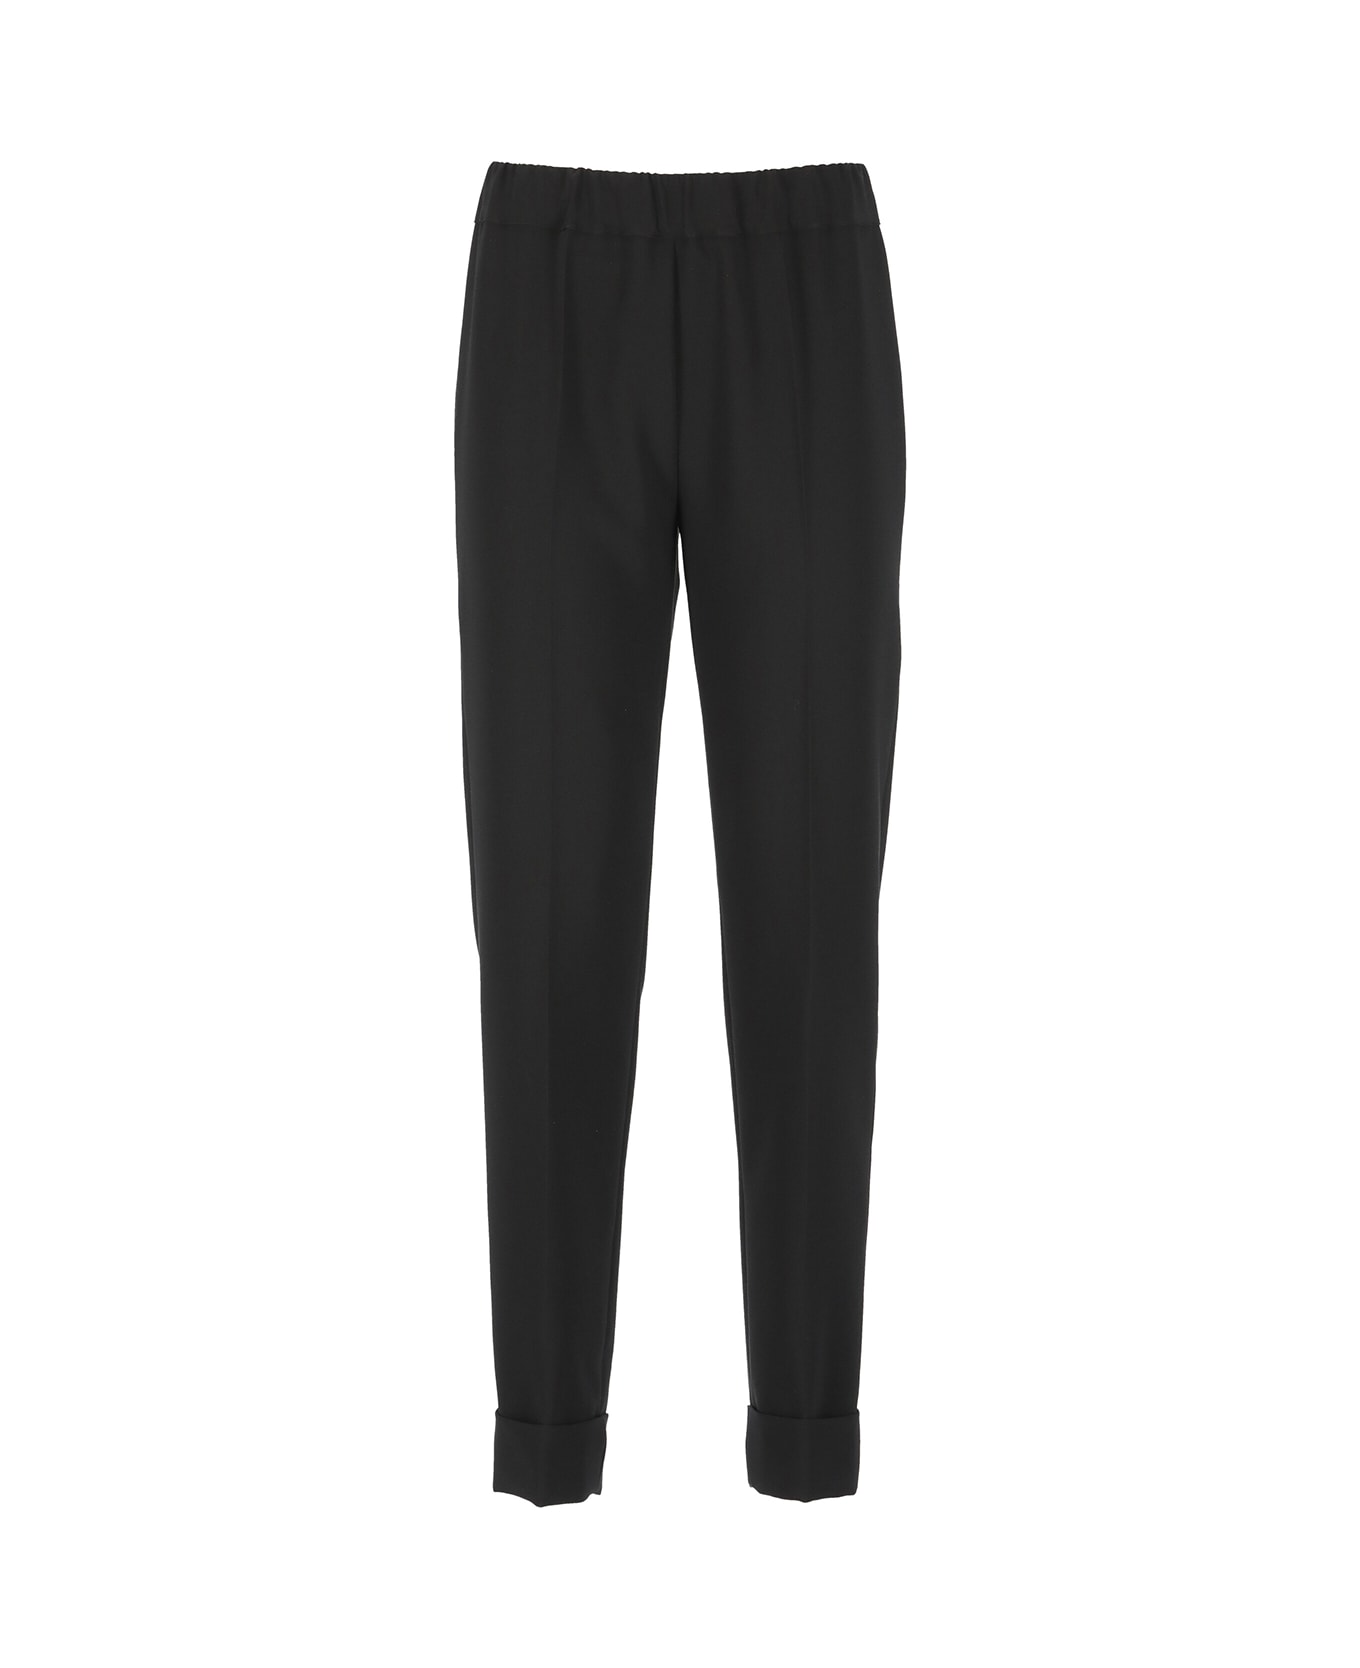 D.Exterior Trousers With Pleats - Black ボトムス